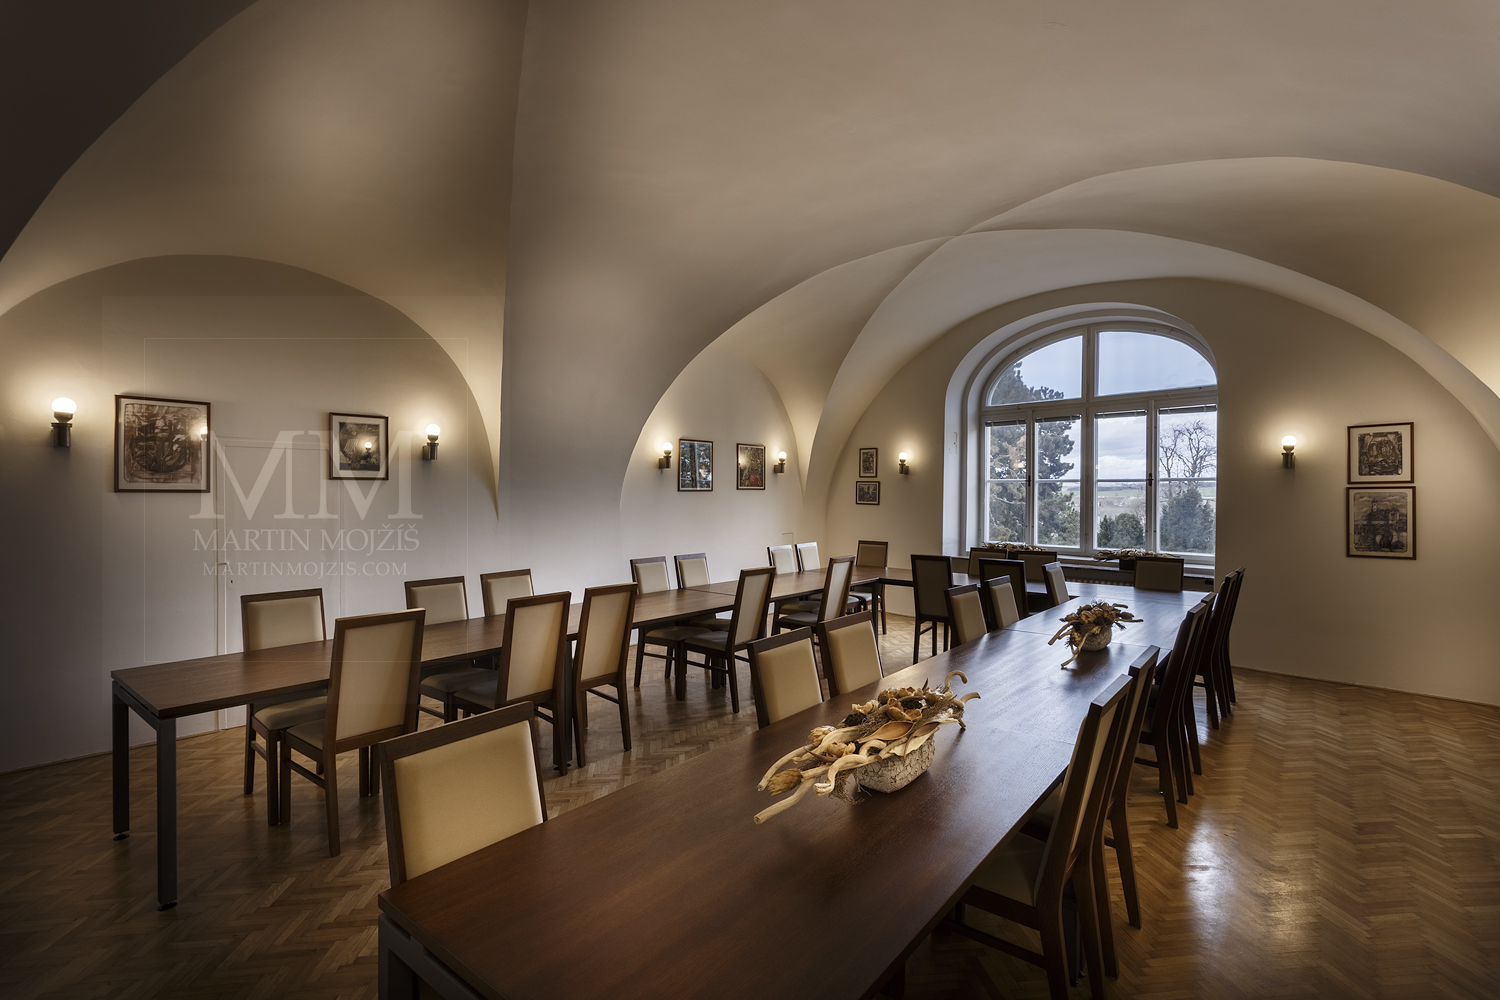 Melnik City Hall – meeting room. Professional photography of architecture - interiors.